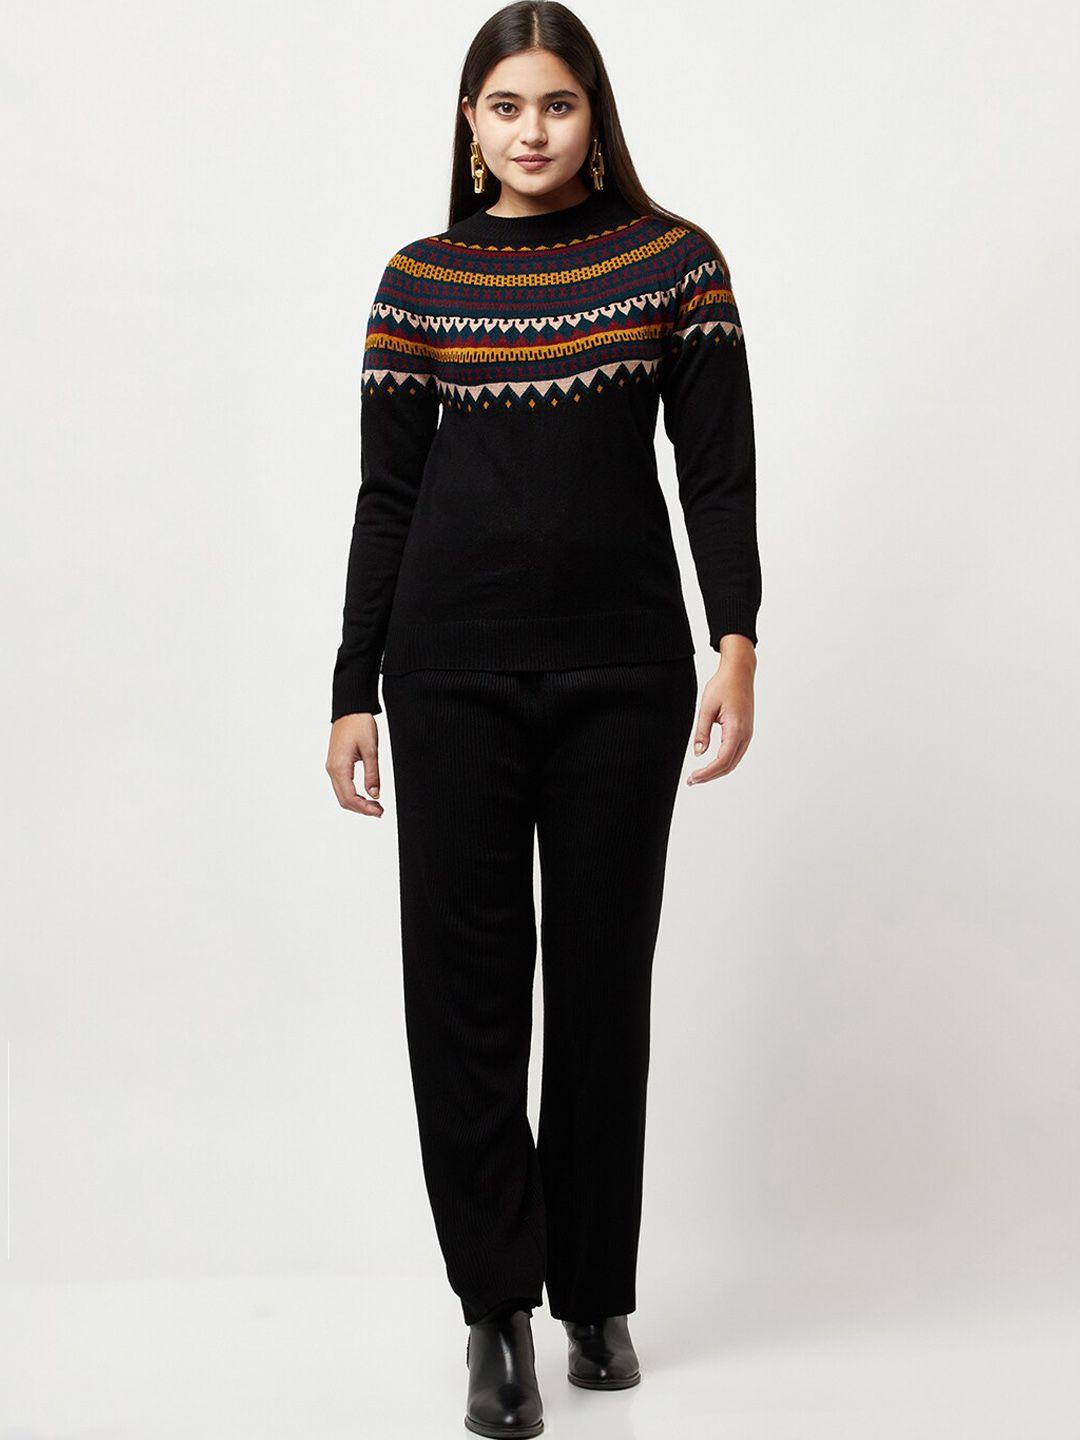 knitstudio self design knitted casual sweater & trousers co-ords